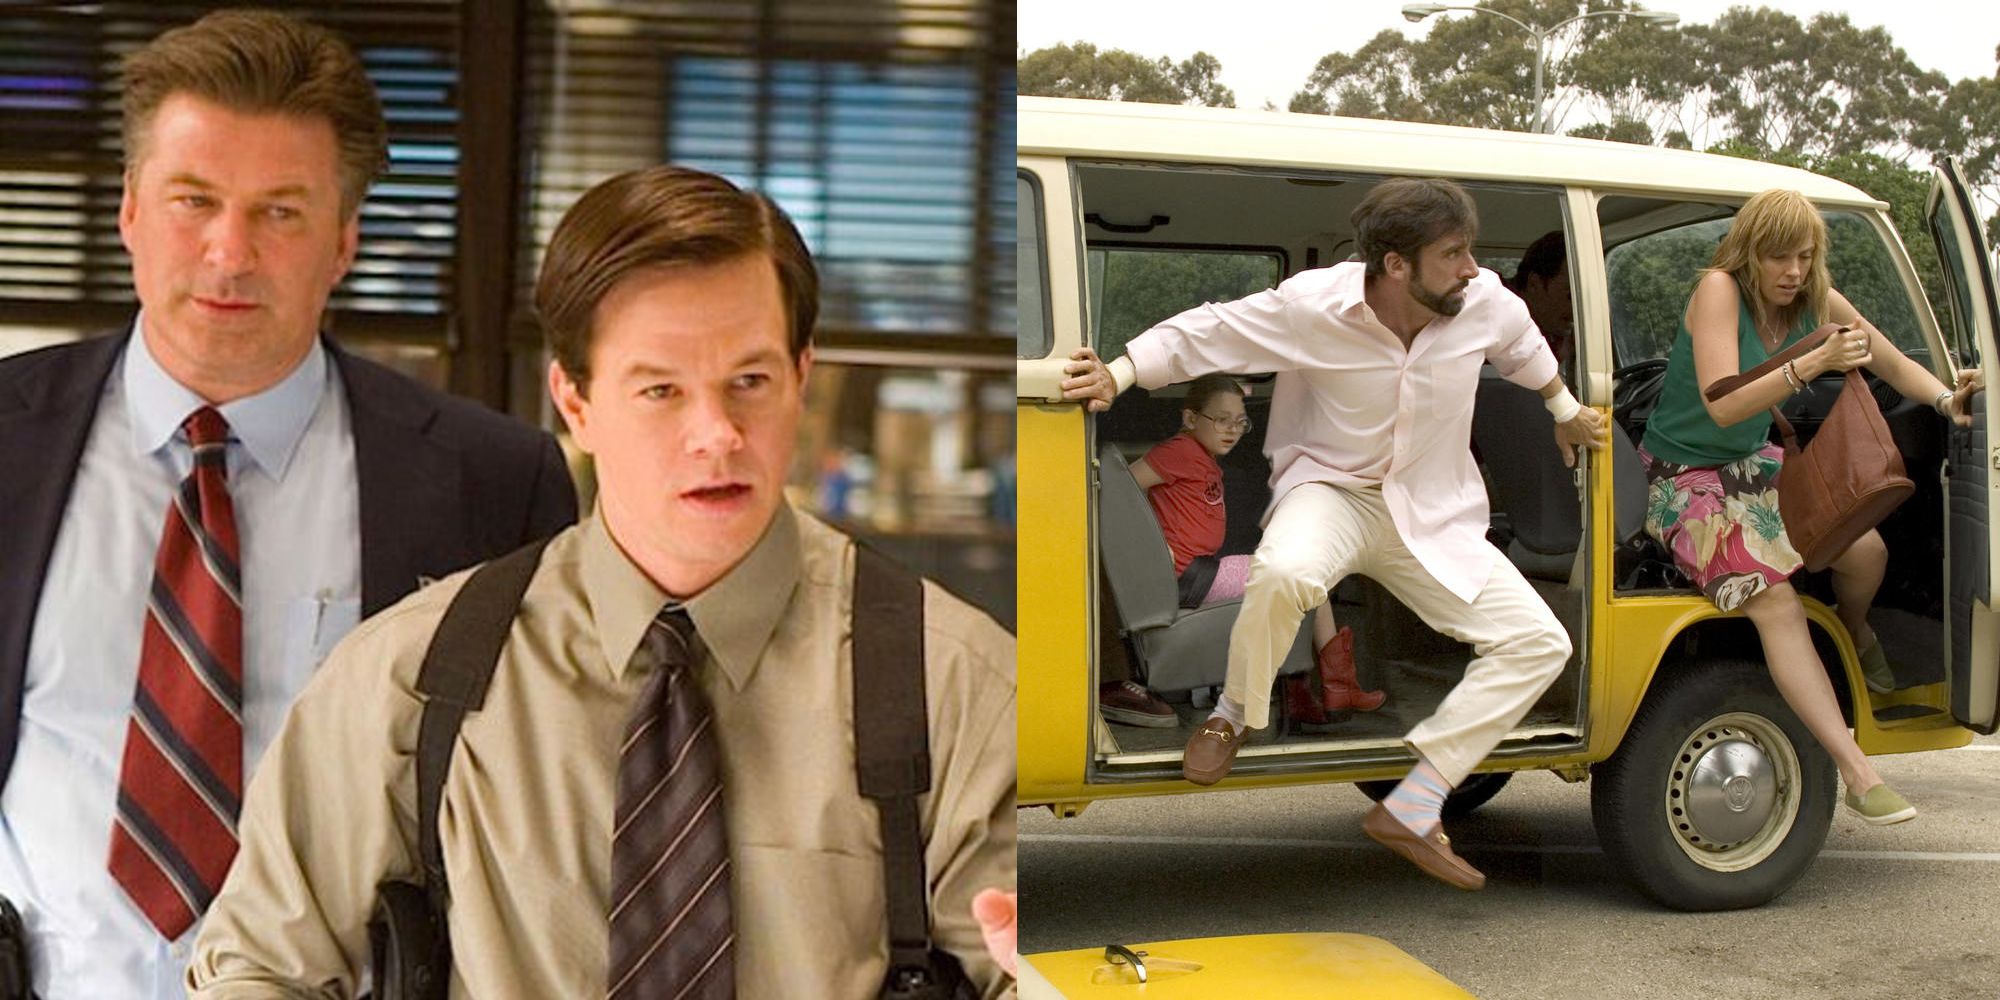 Alec Baldwin and Mark Wahlberg in The Departed; Steve Carrell and Toni Collette jumping out of the van in Little Miss Sunshine